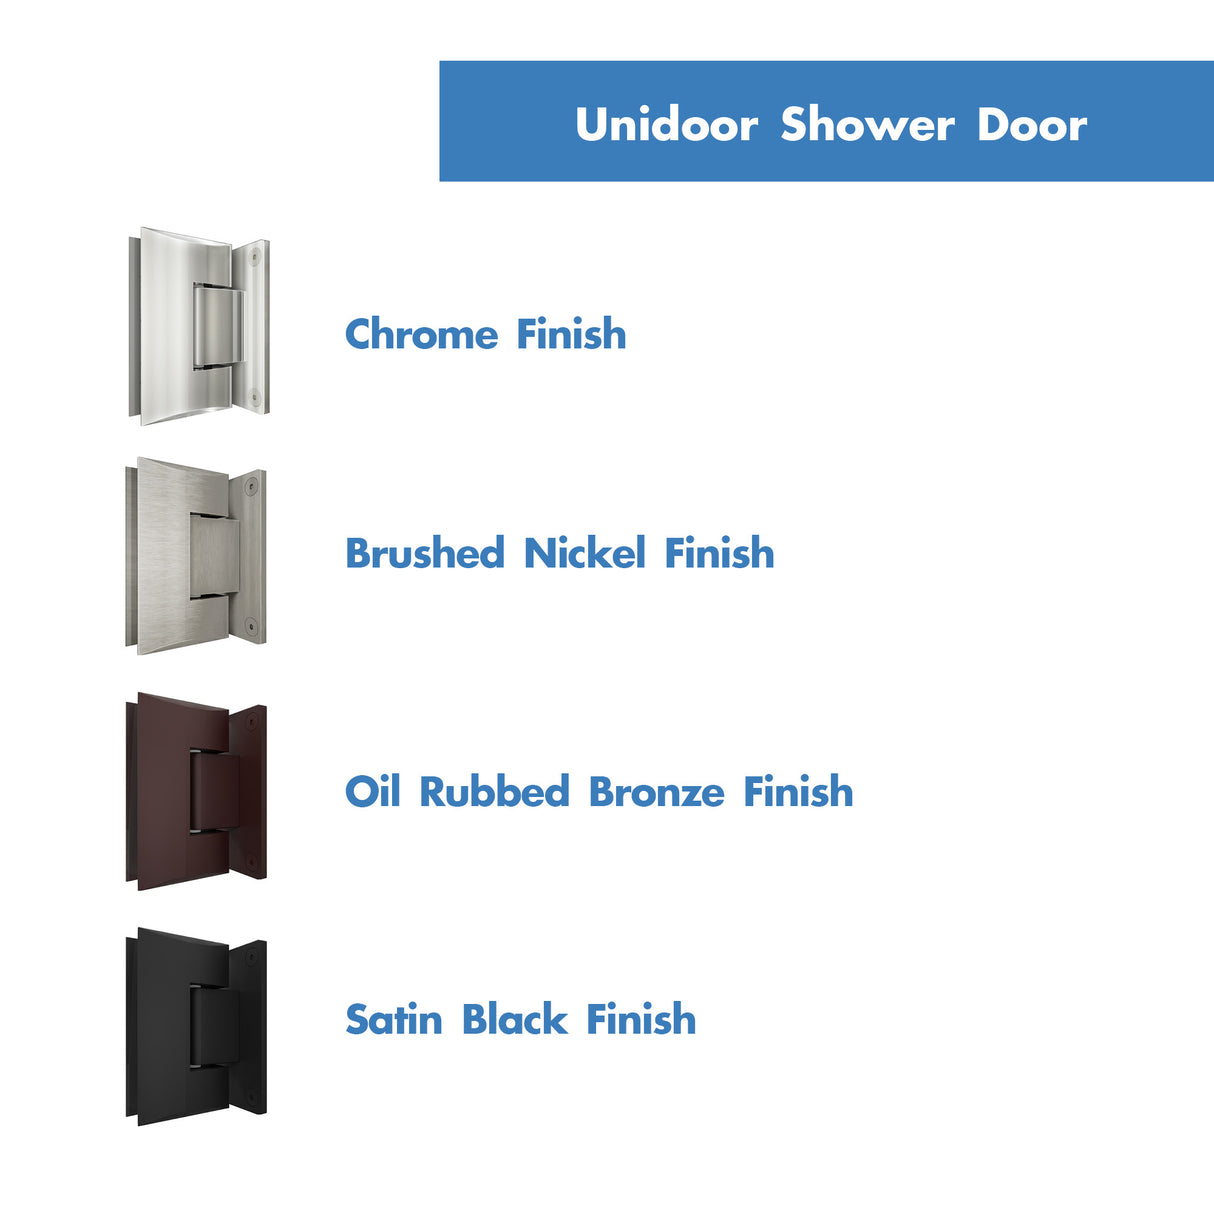 DreamLine Unidoor Plus 57 in. W x 34 3/8 in. D x 72 in. H Frameless Hinged Shower Enclosure in Chrome